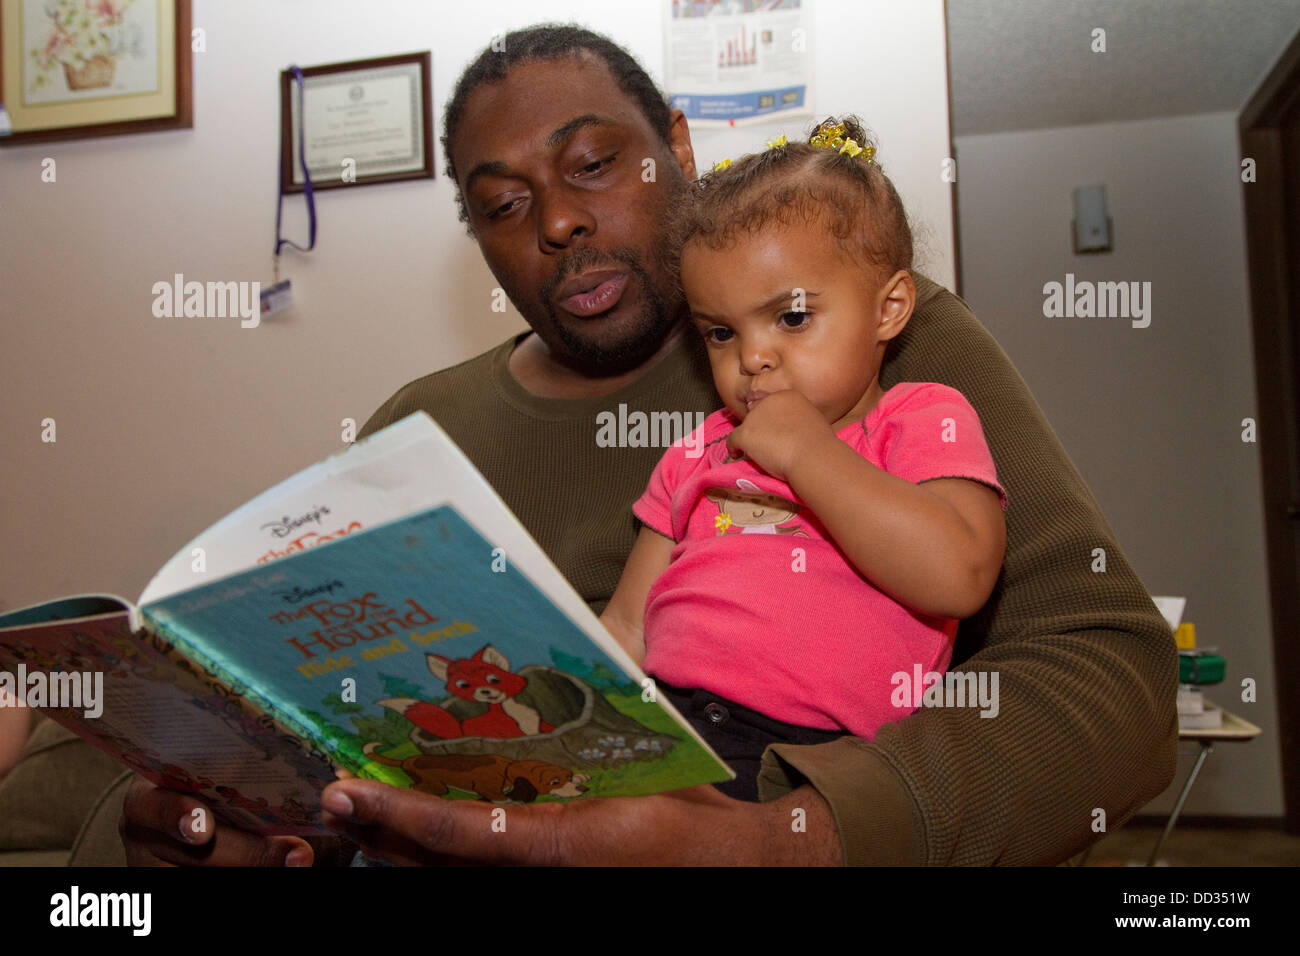 African-American male former inmate reading to his young daughter. This inmate managed to get a degree after his release. Stock Photo